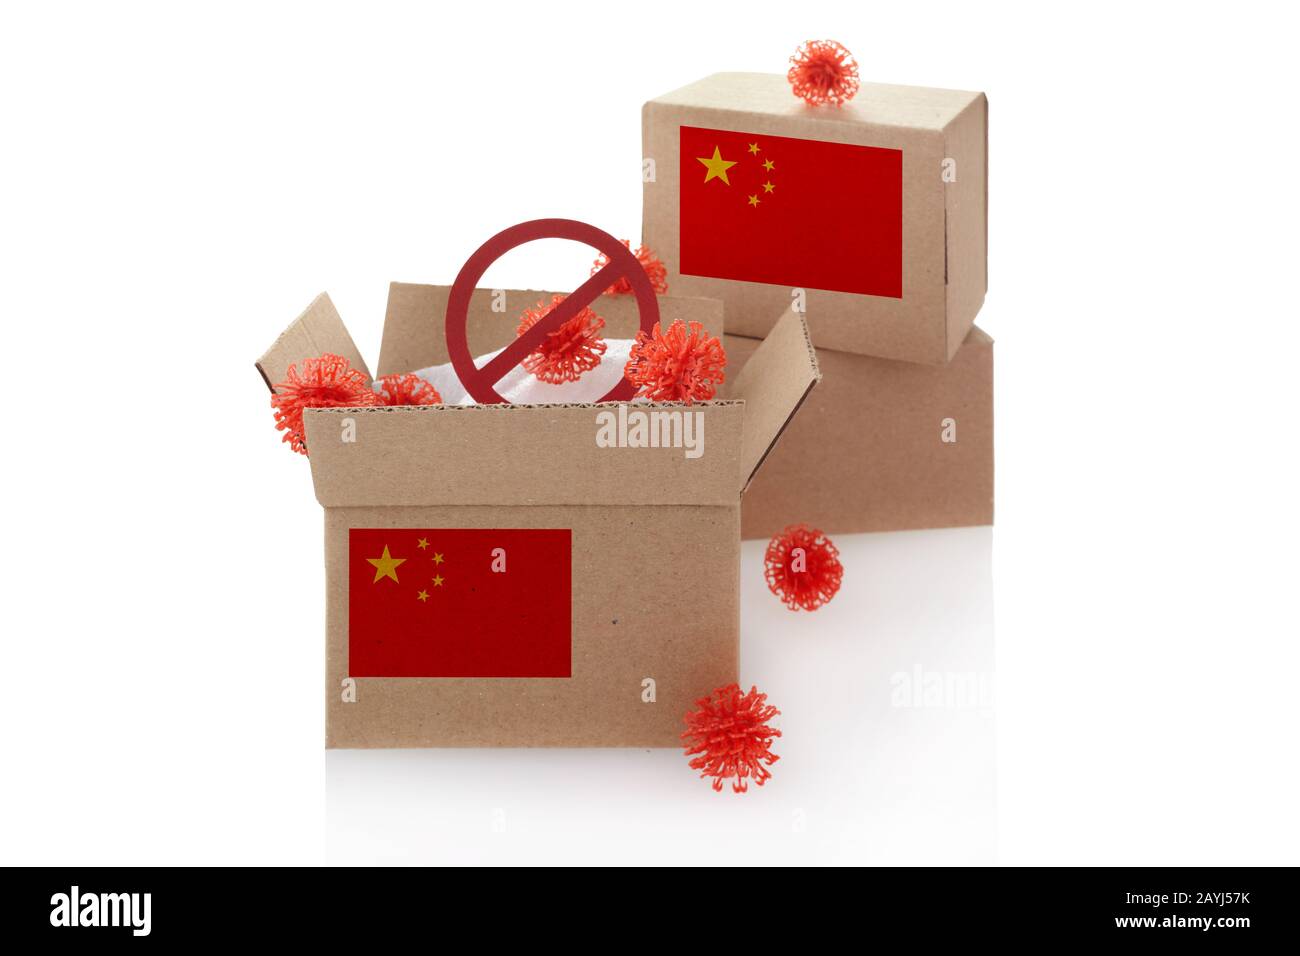 Coronavirus infected parcels from China. Red bacteria cells in boxes. Wuhan flu affecting international postal. Stock Photo